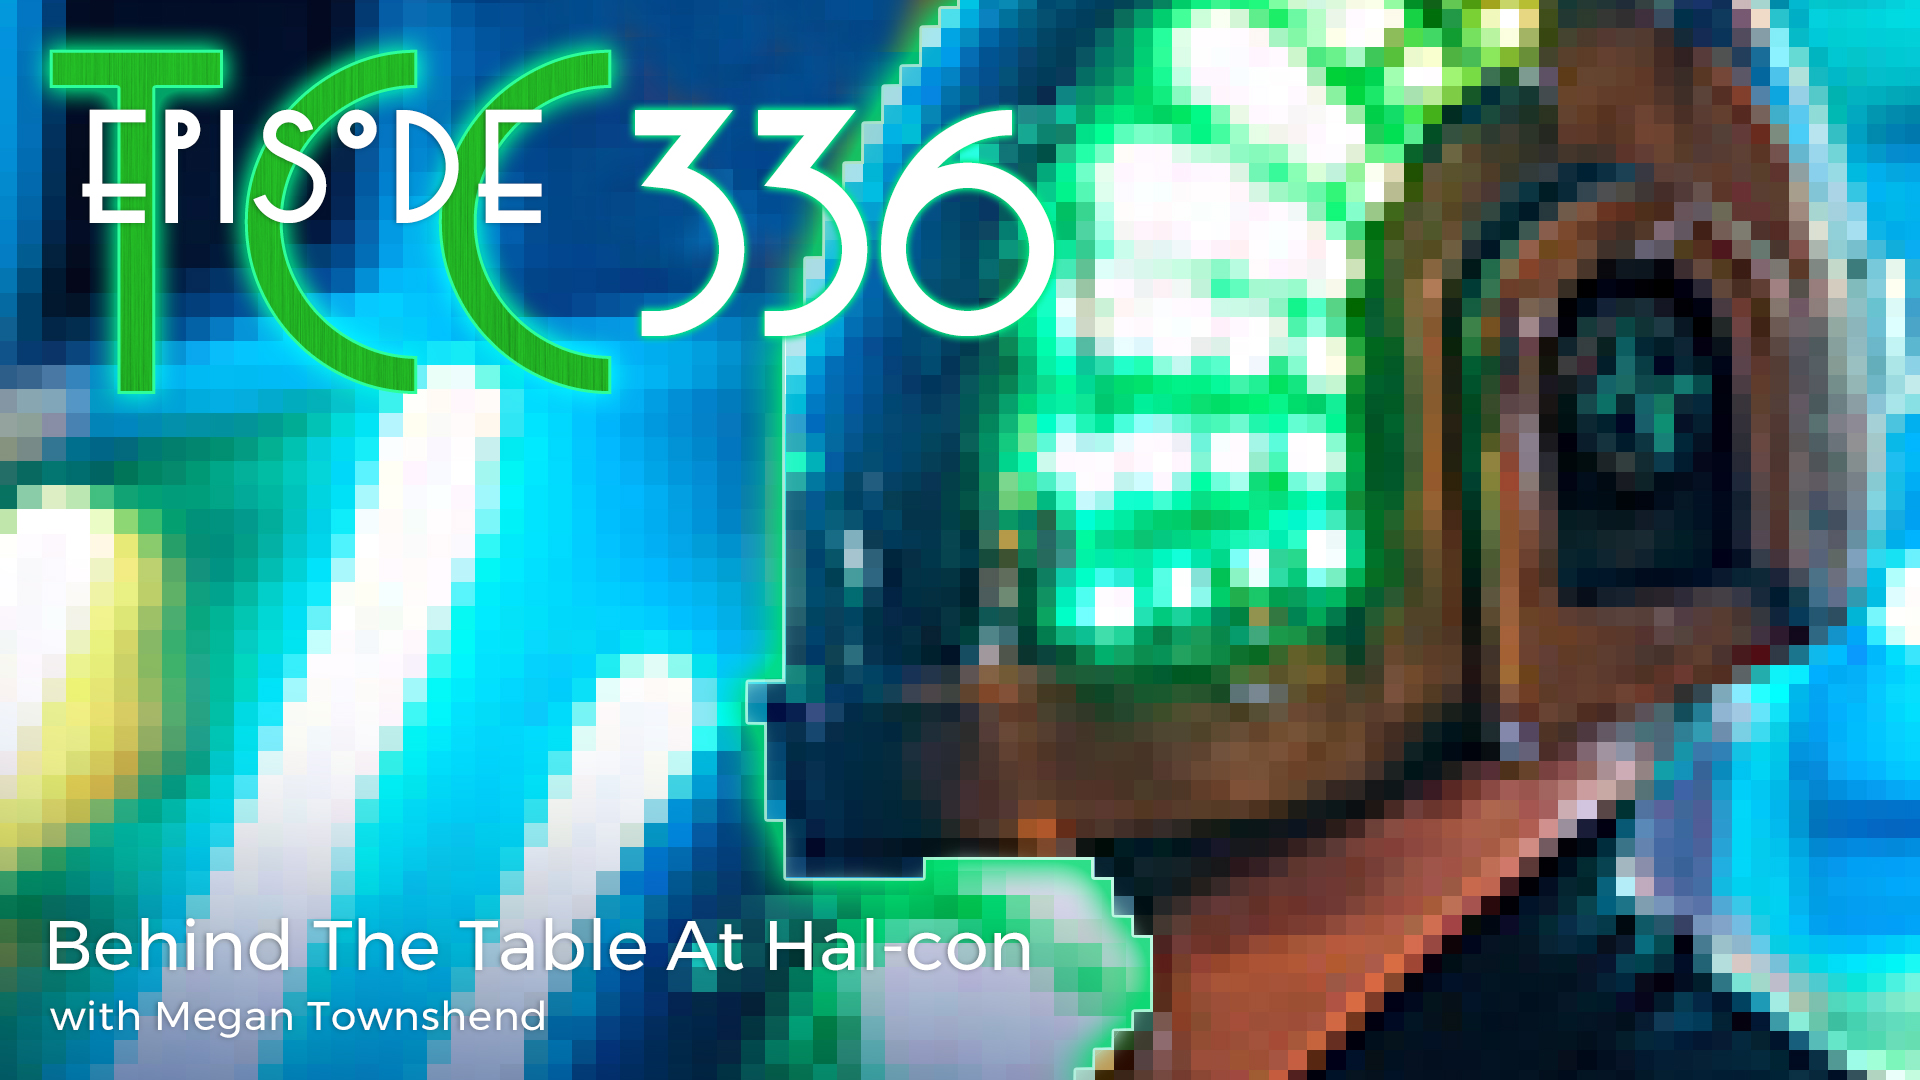 The Citadel Cafe 336: Behind The Table At Hal-Con